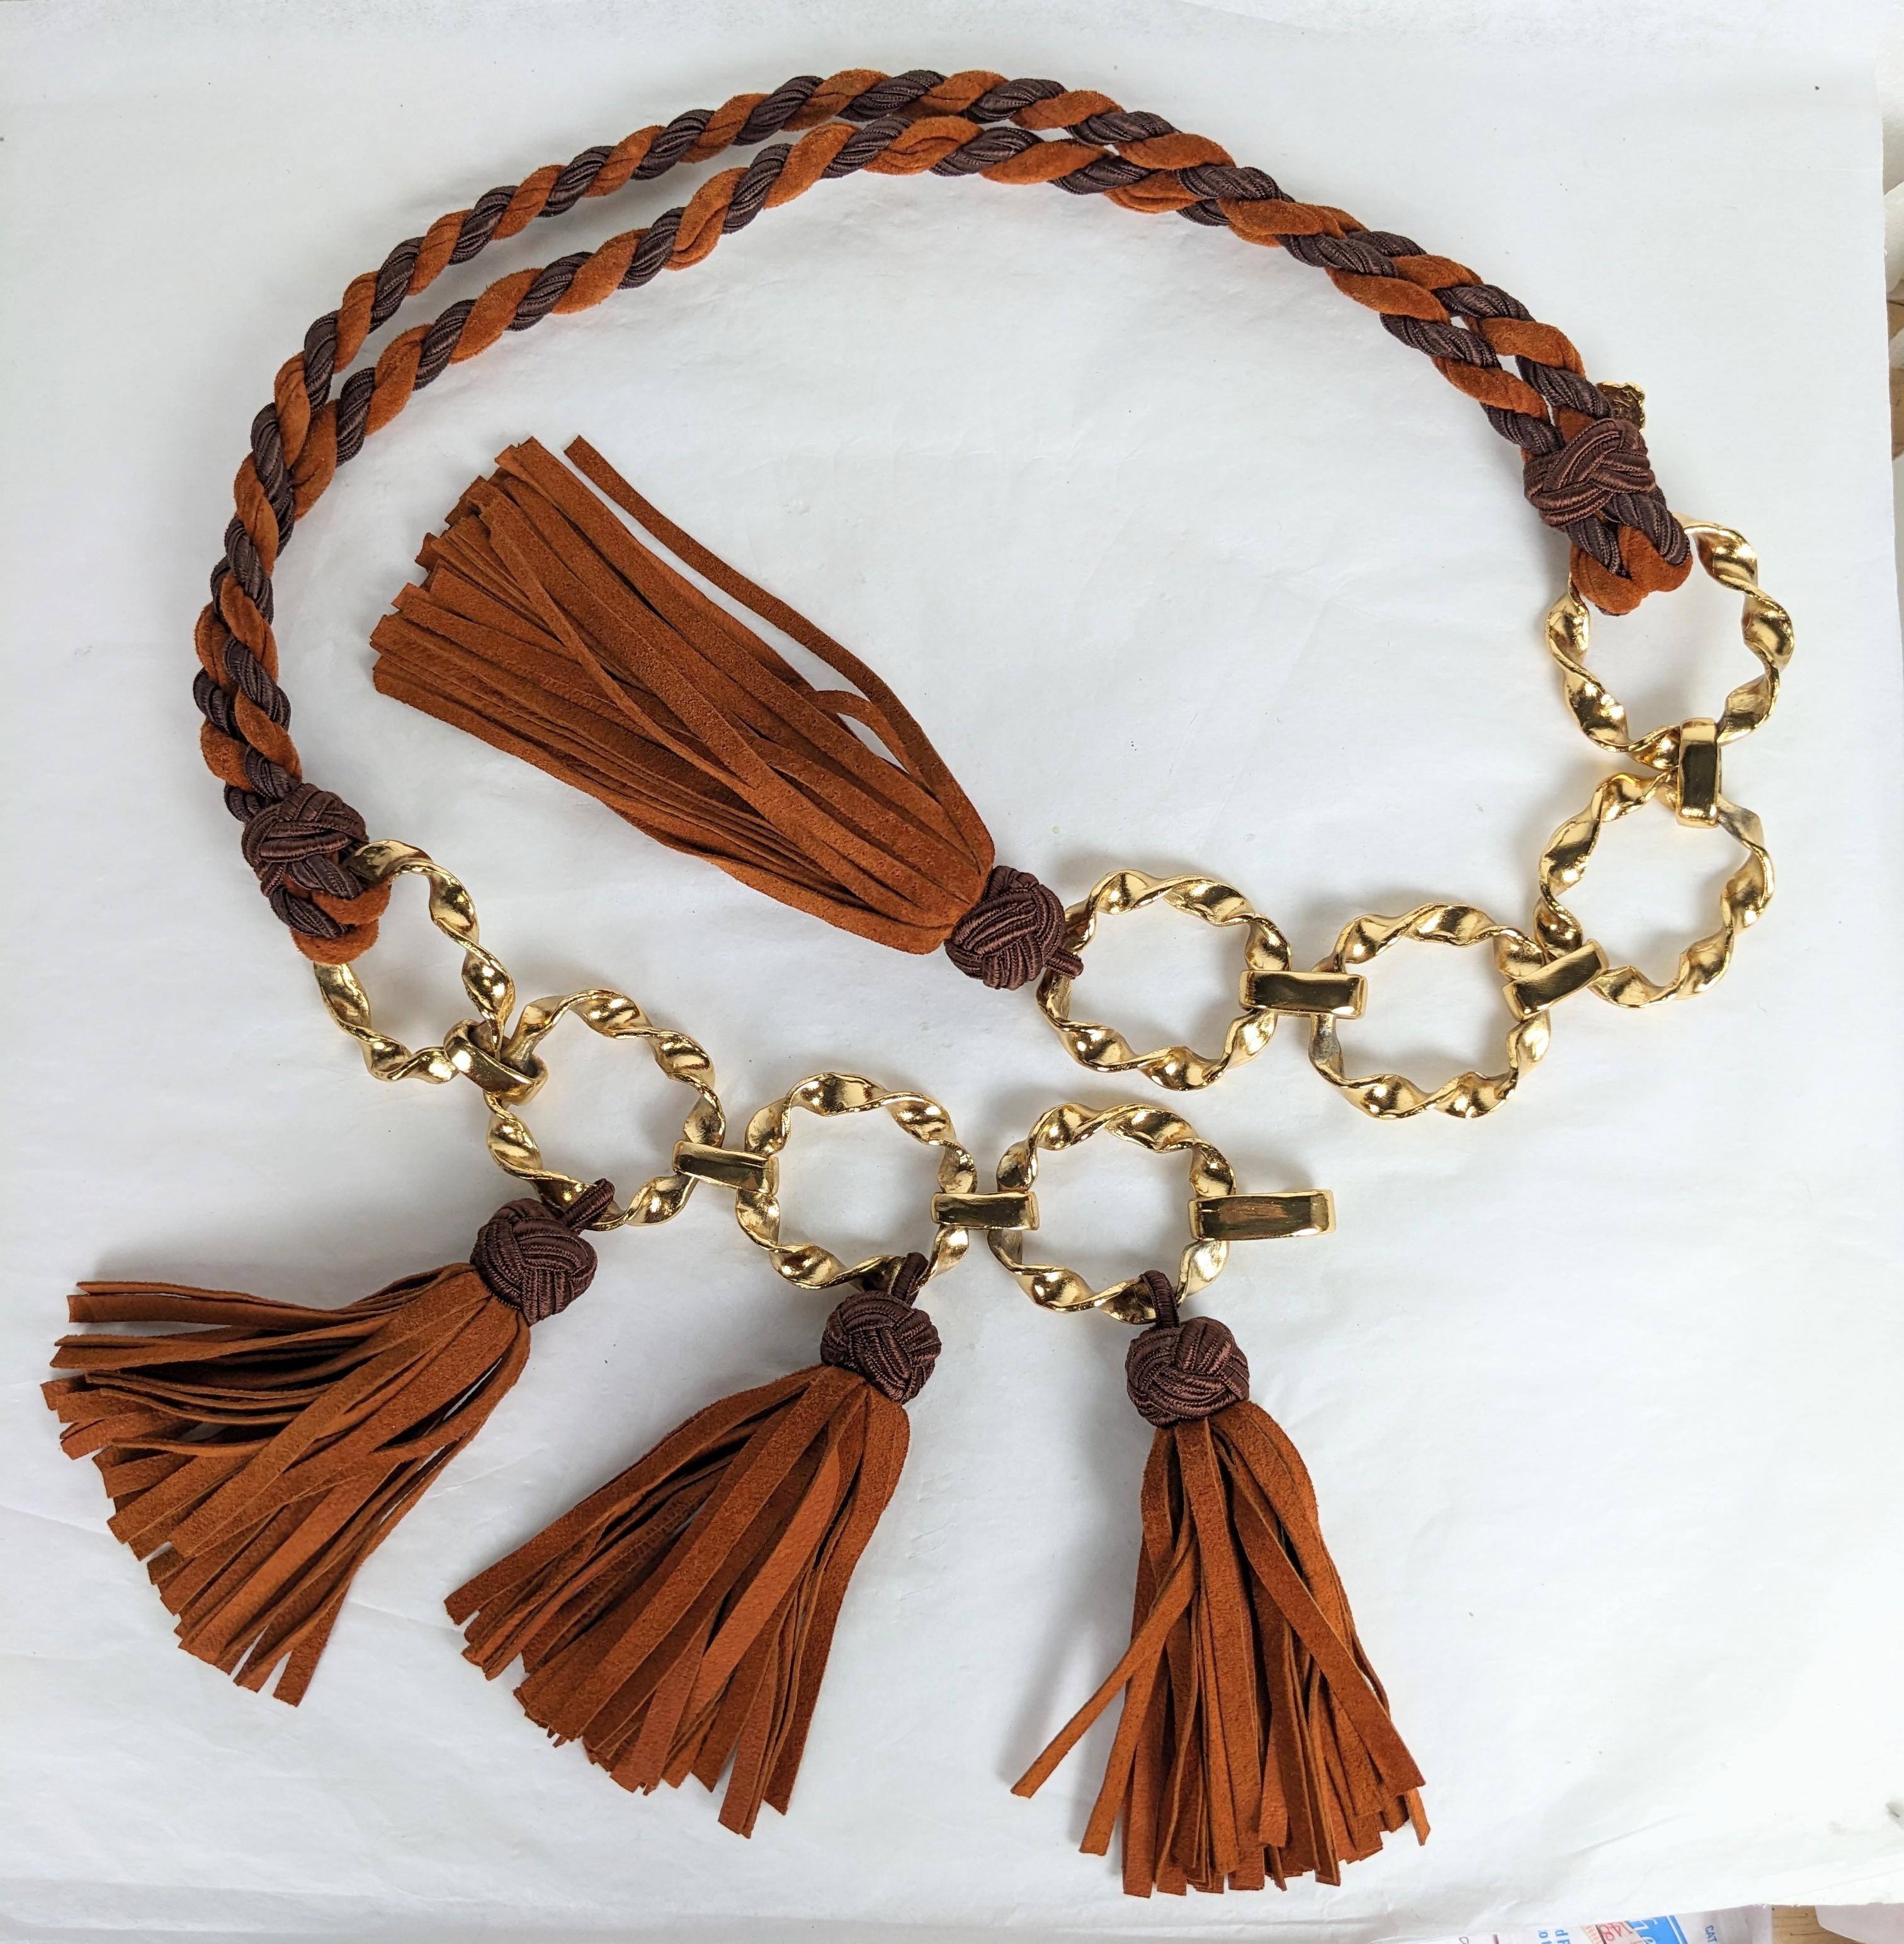 Yves Saint Laurent Rive Gauche chain belt. Composed of rust brown braided suede, purple silk passementerie woven cord and round gilt plate round twisted links. Further decorated with Chinese inspired passementerie and suede tassels. Excellent